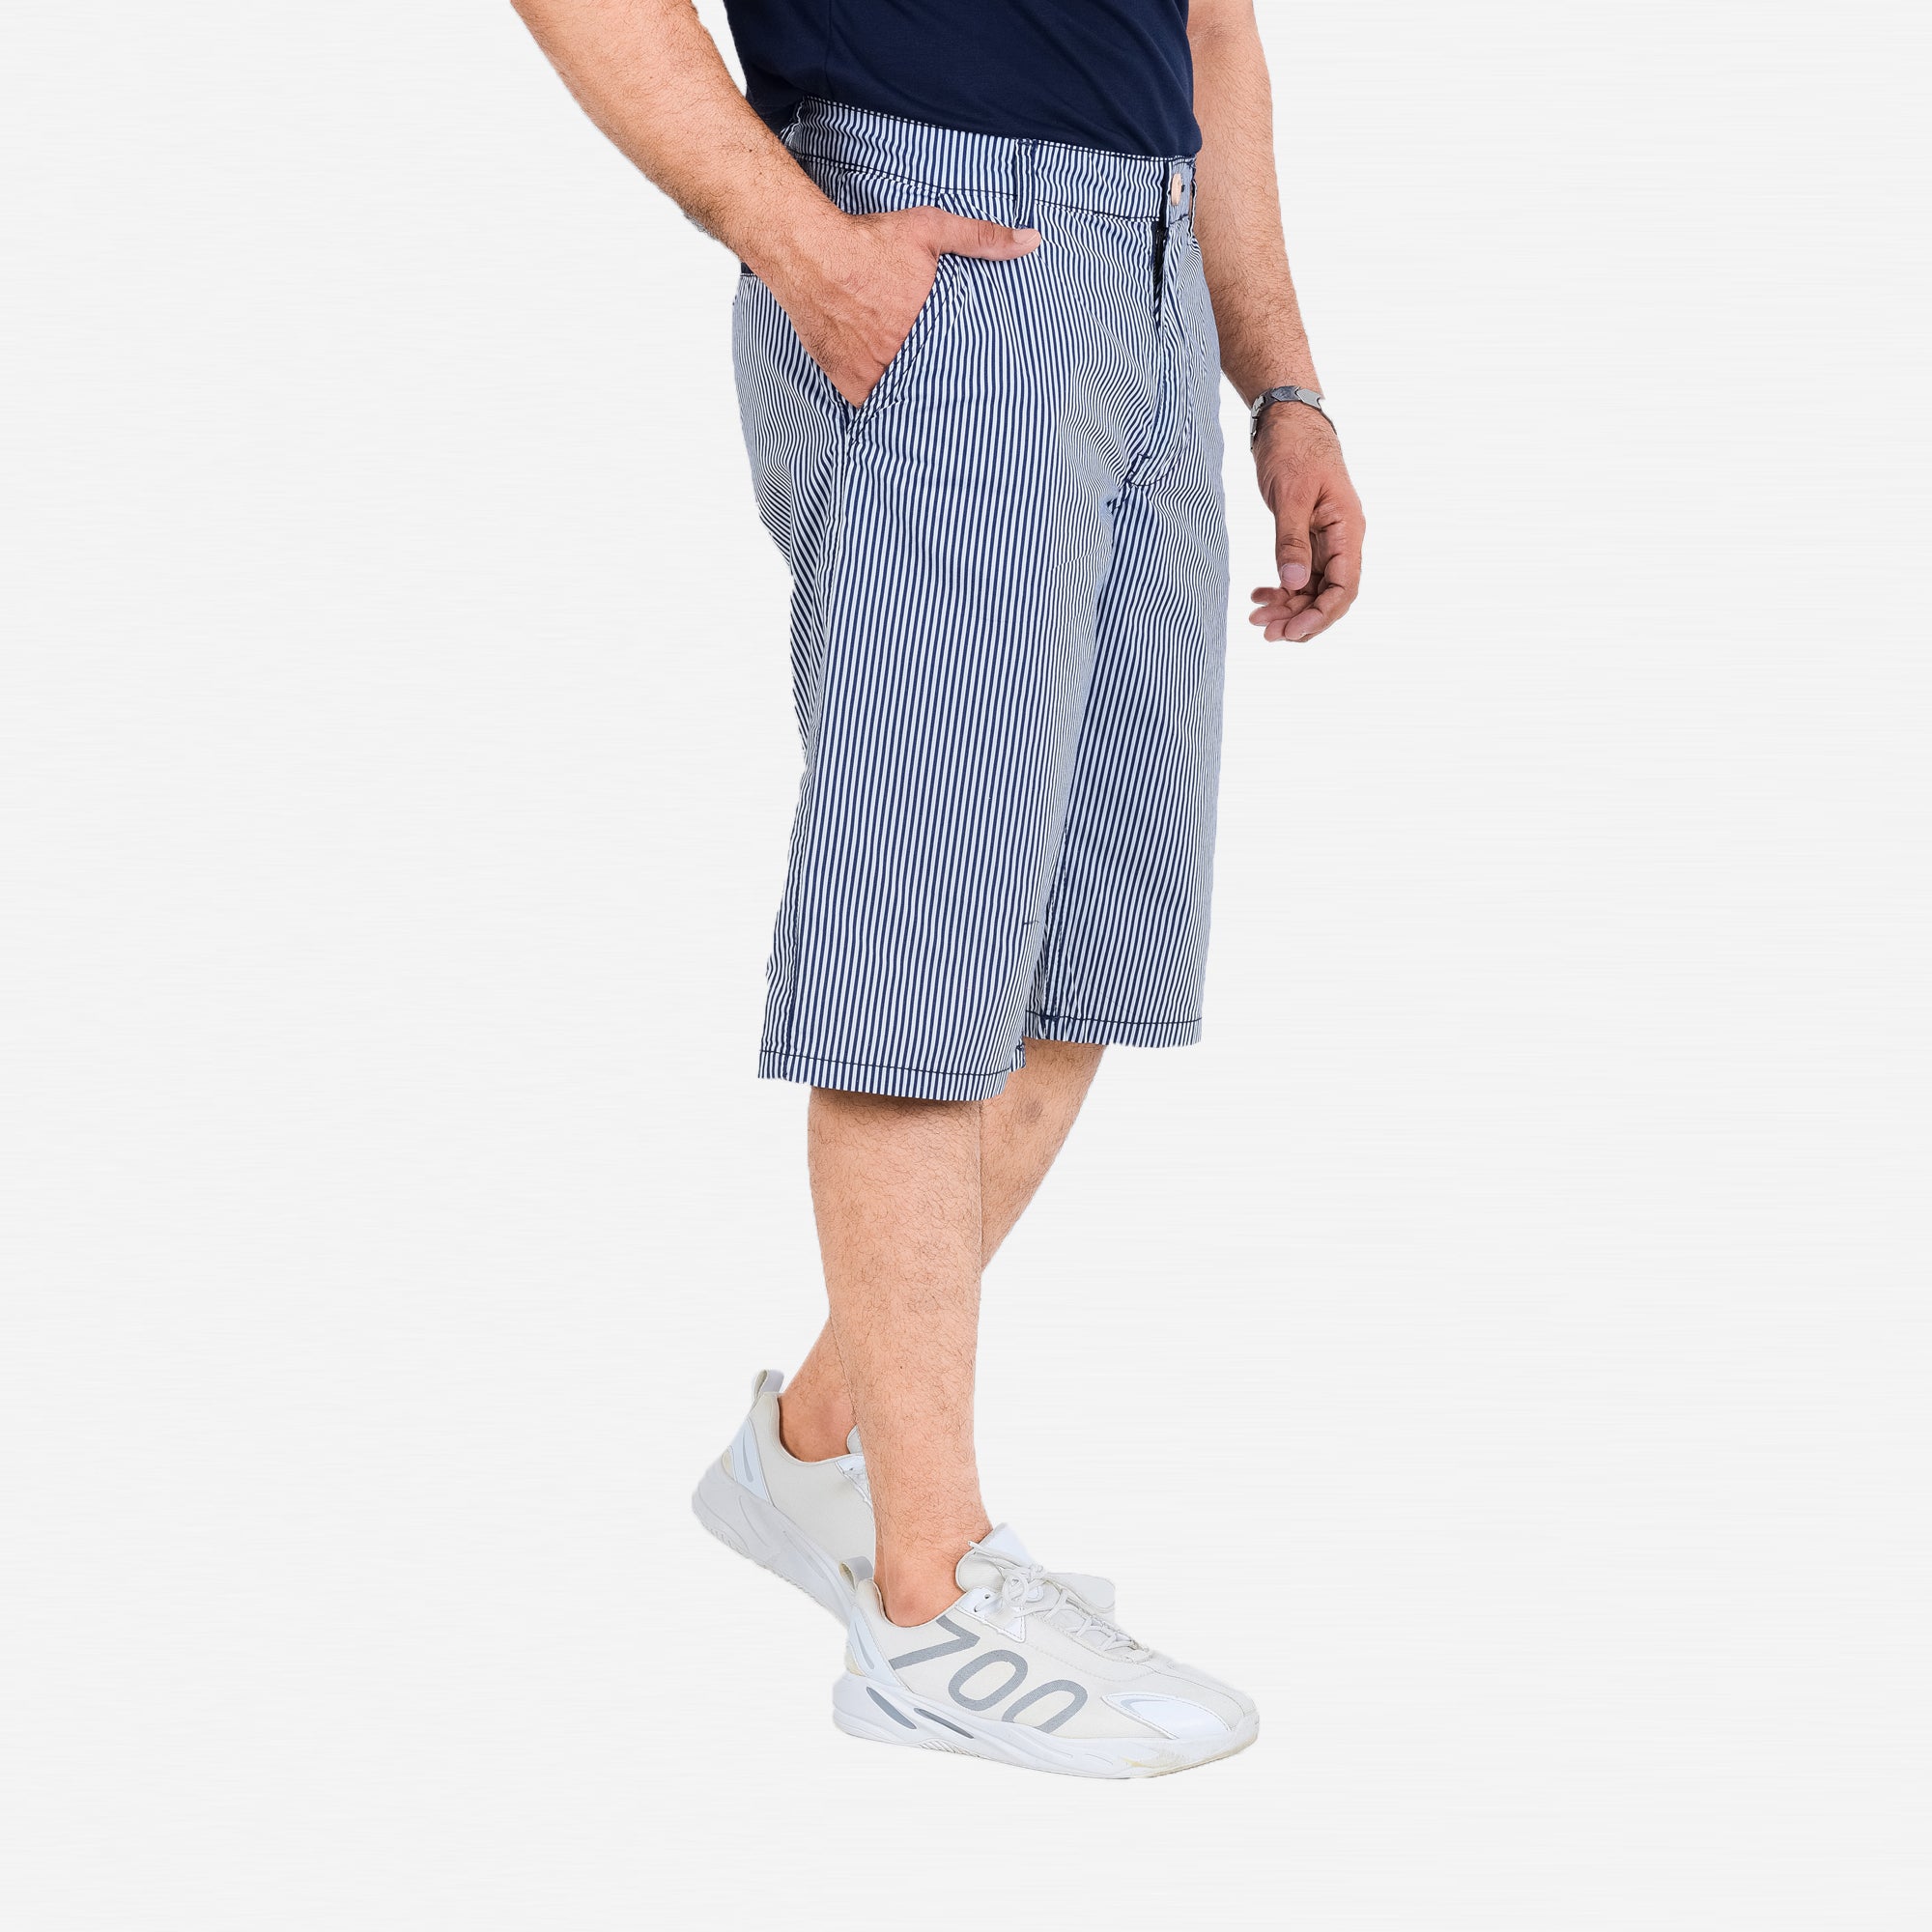 Men's Slim Fit Casual Chino Shorts